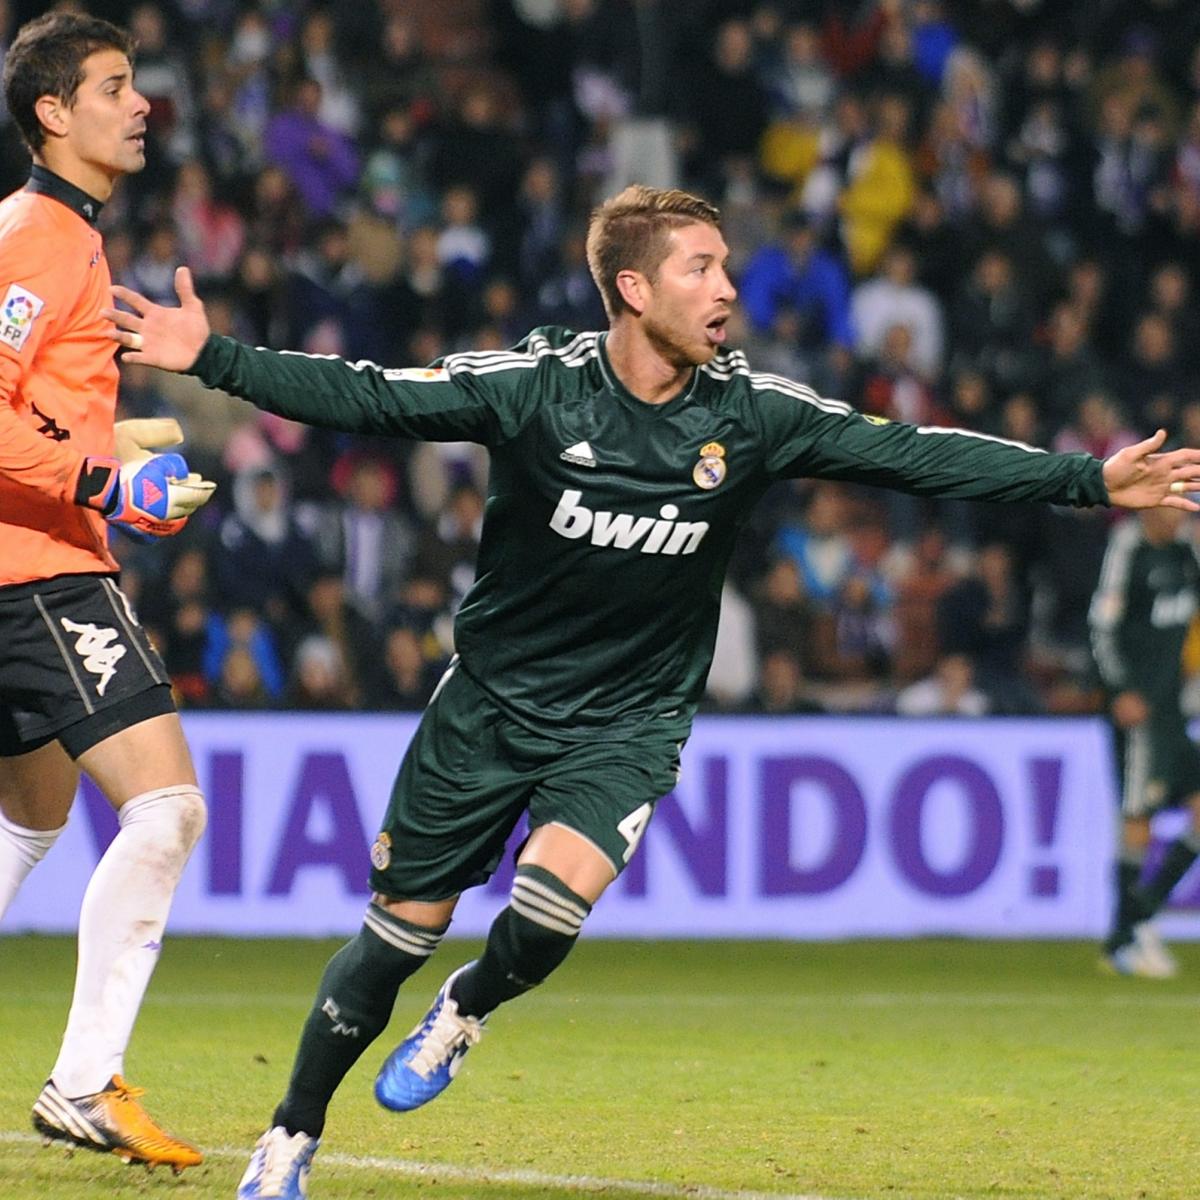 Real Valladolid vs. Real Madrid: 6 Things We Learned from Royal Victory